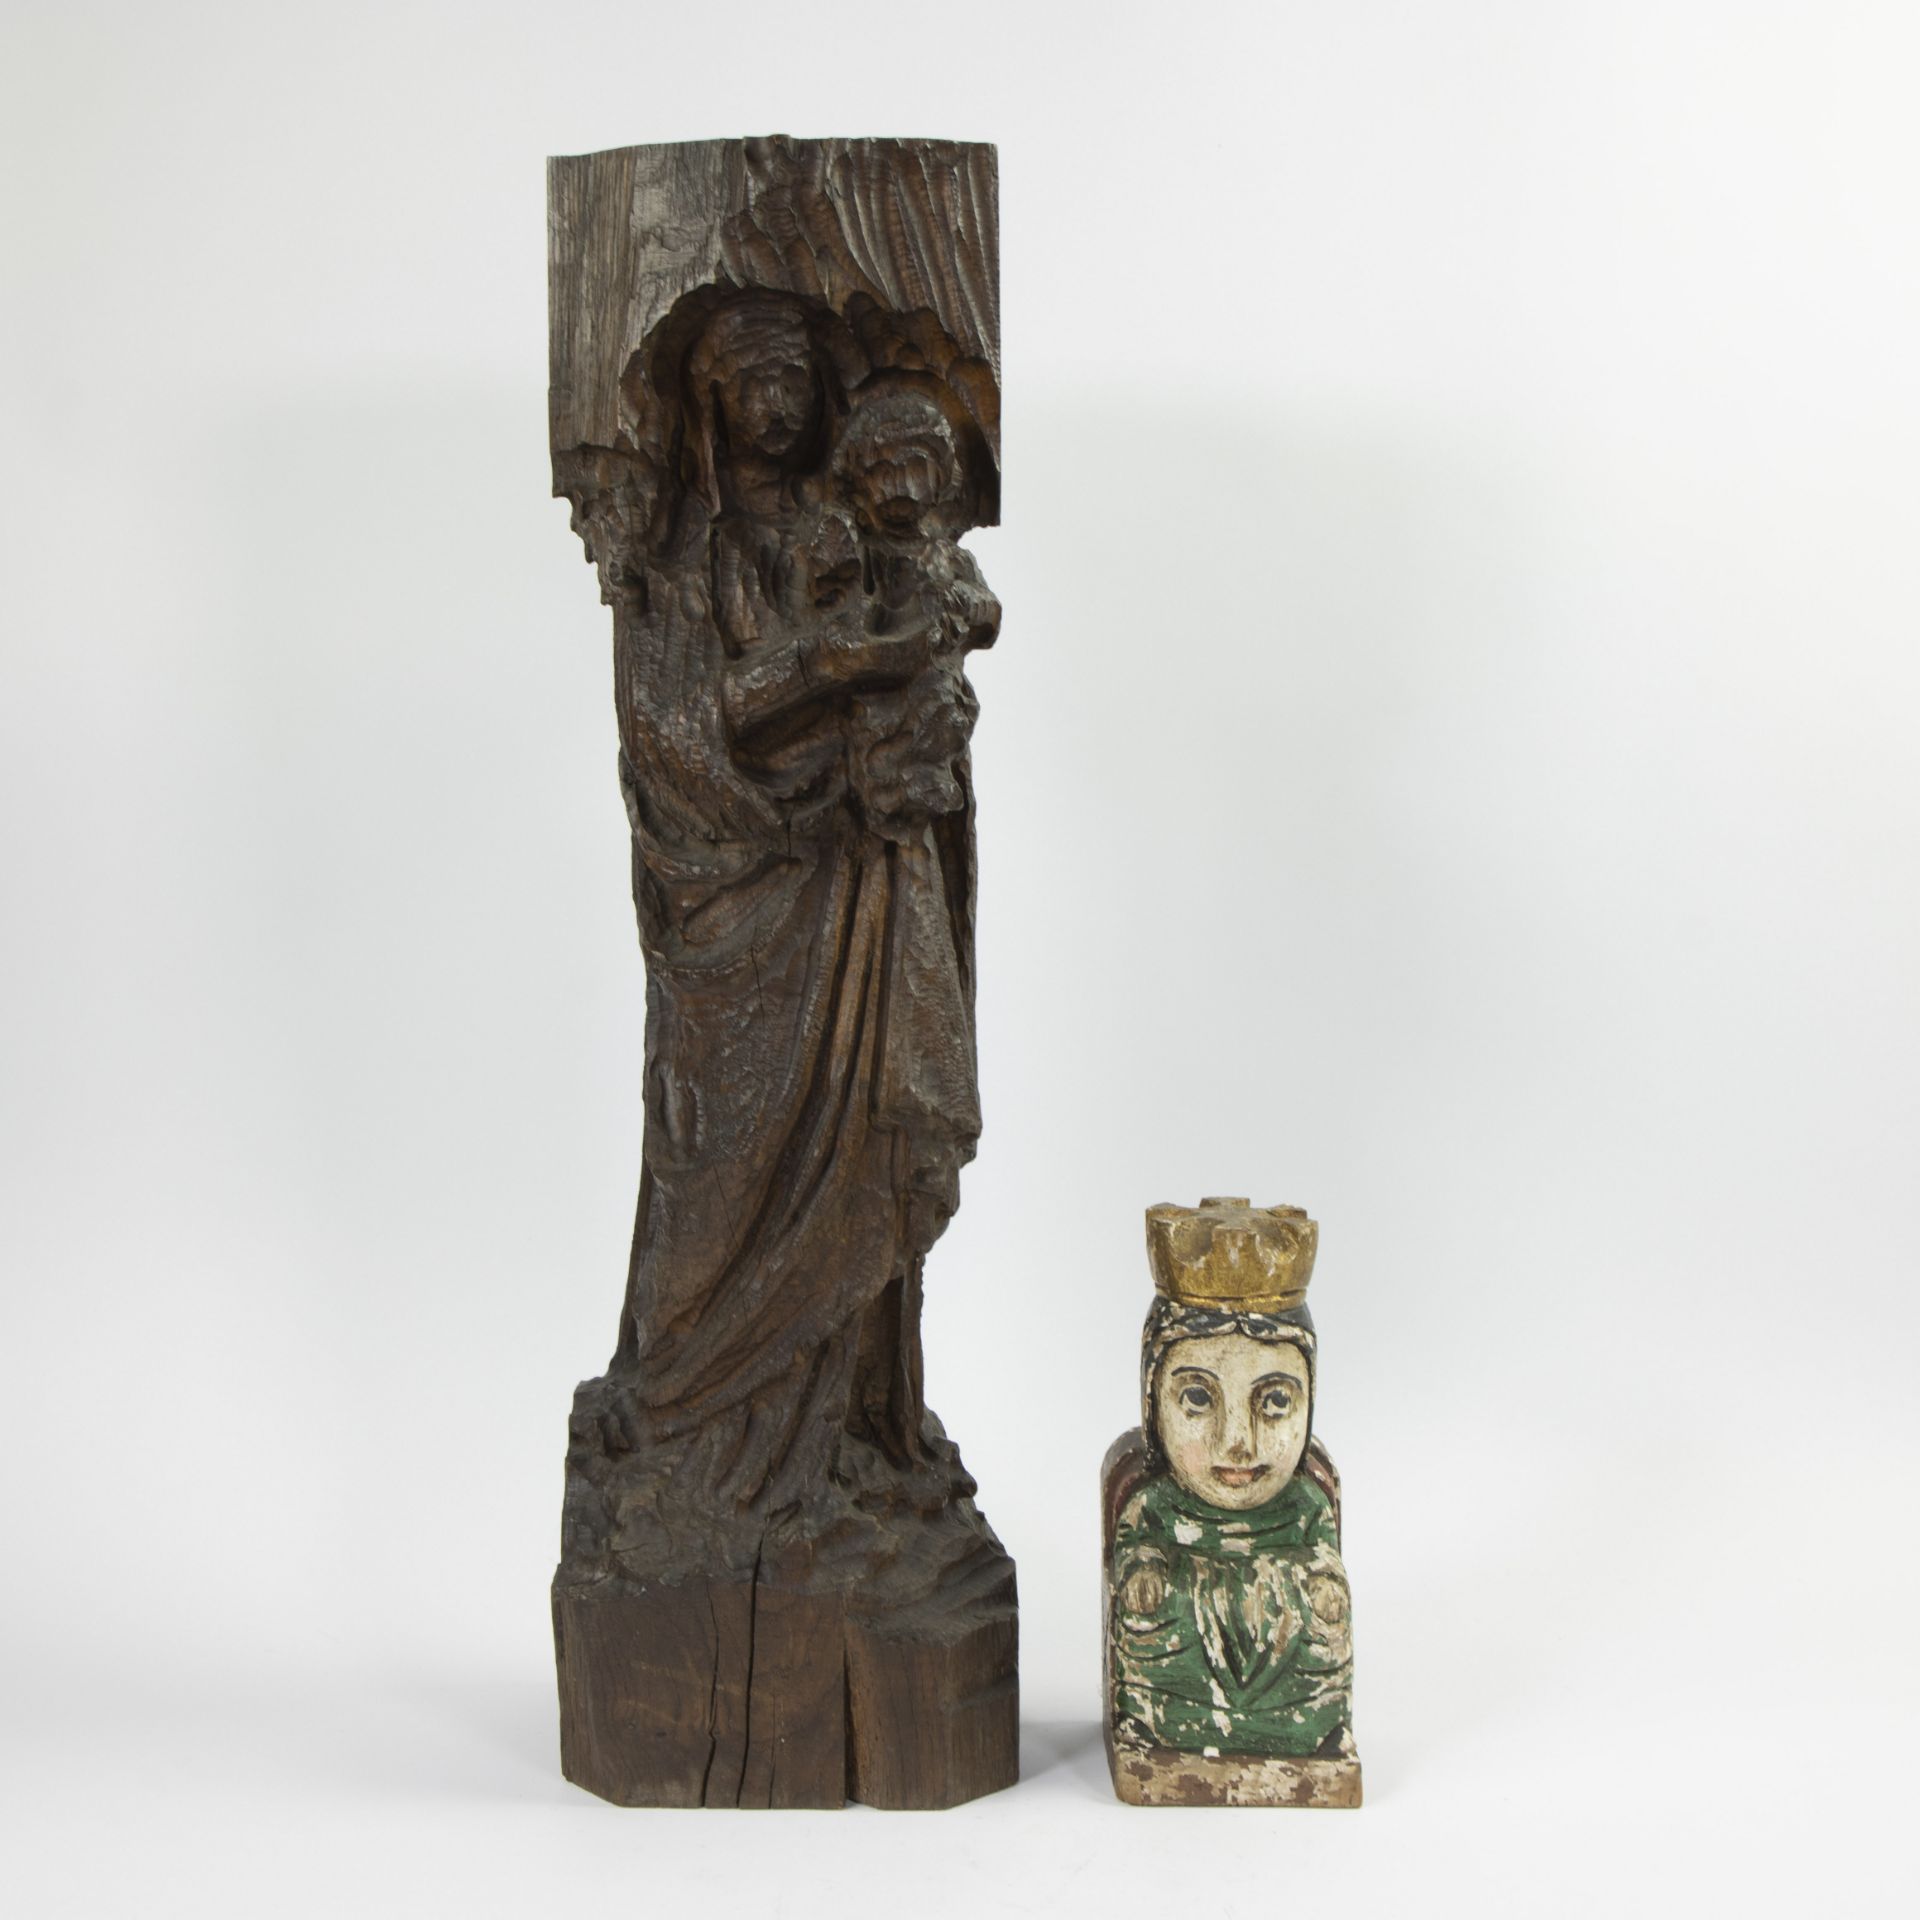 Collection of decorative folk statue and madonna with child